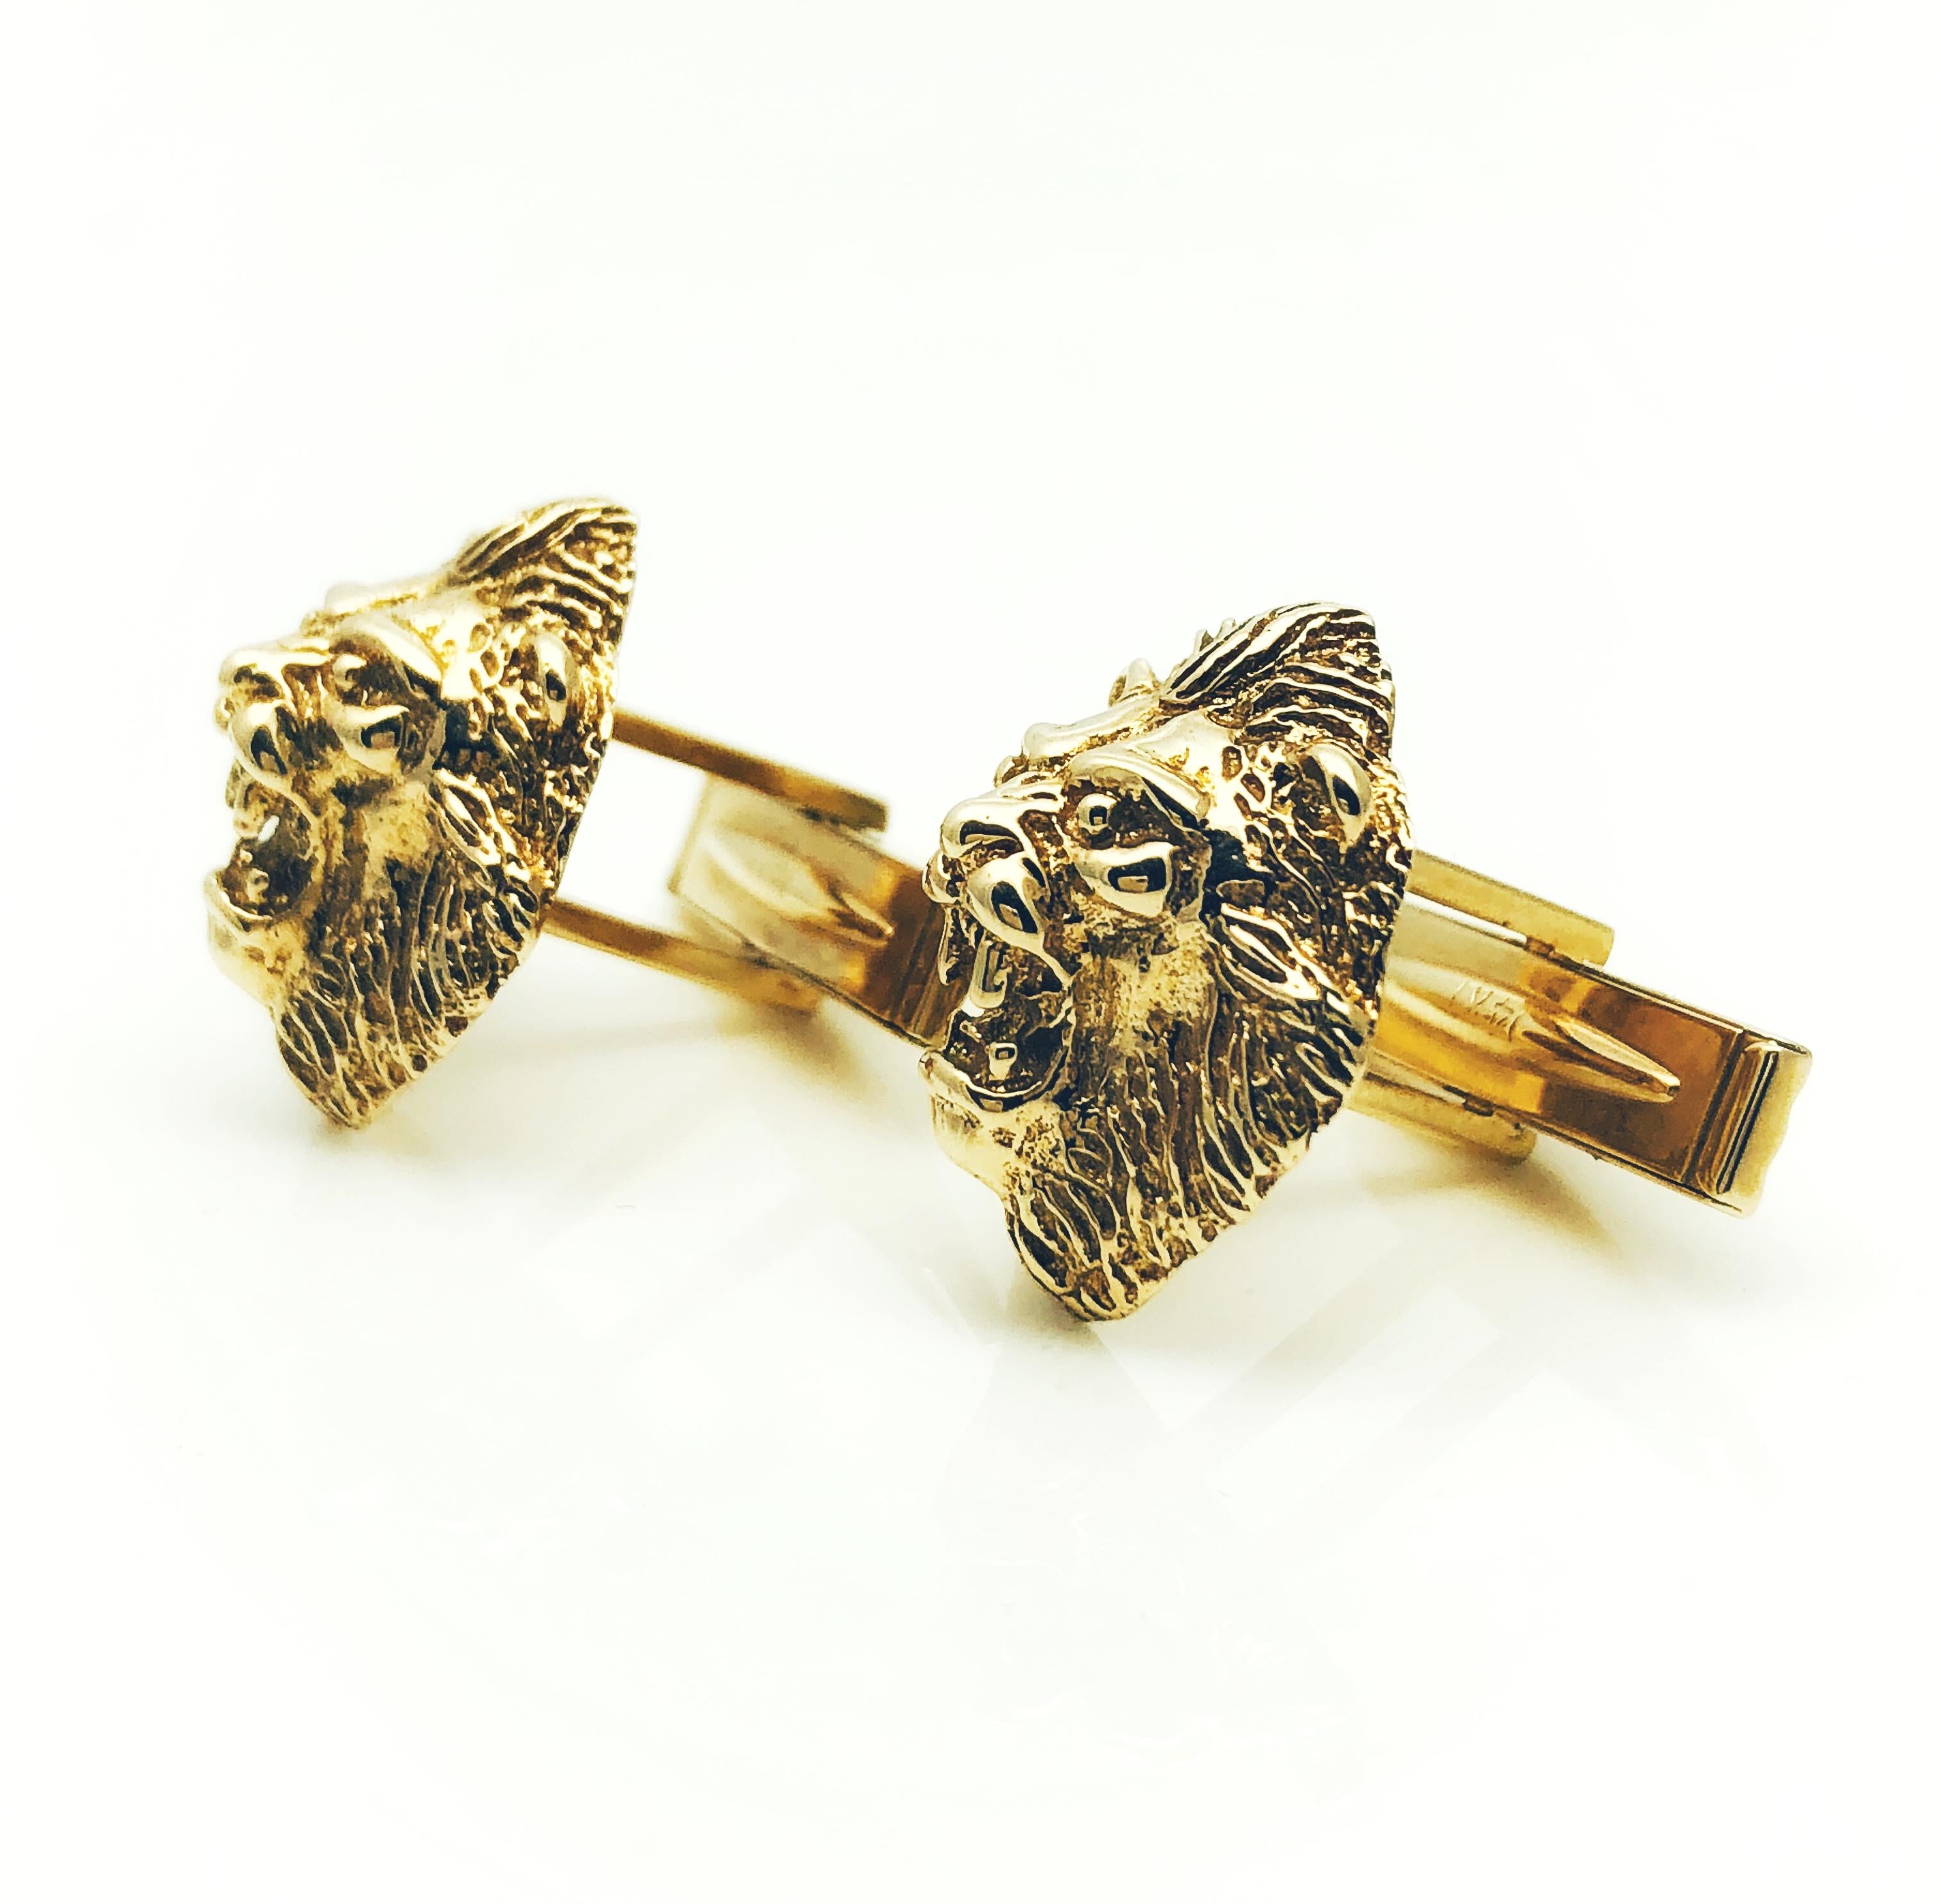 These Vintage Lion's Head Cufflinks are just stunning. They depict the face of a fiercely growling lion. They are made in 14k yellow gold, measure 3/4 inch by 5/8 inch and weigh 14.6 grams. These are beautifully crafted and detailed and would make a